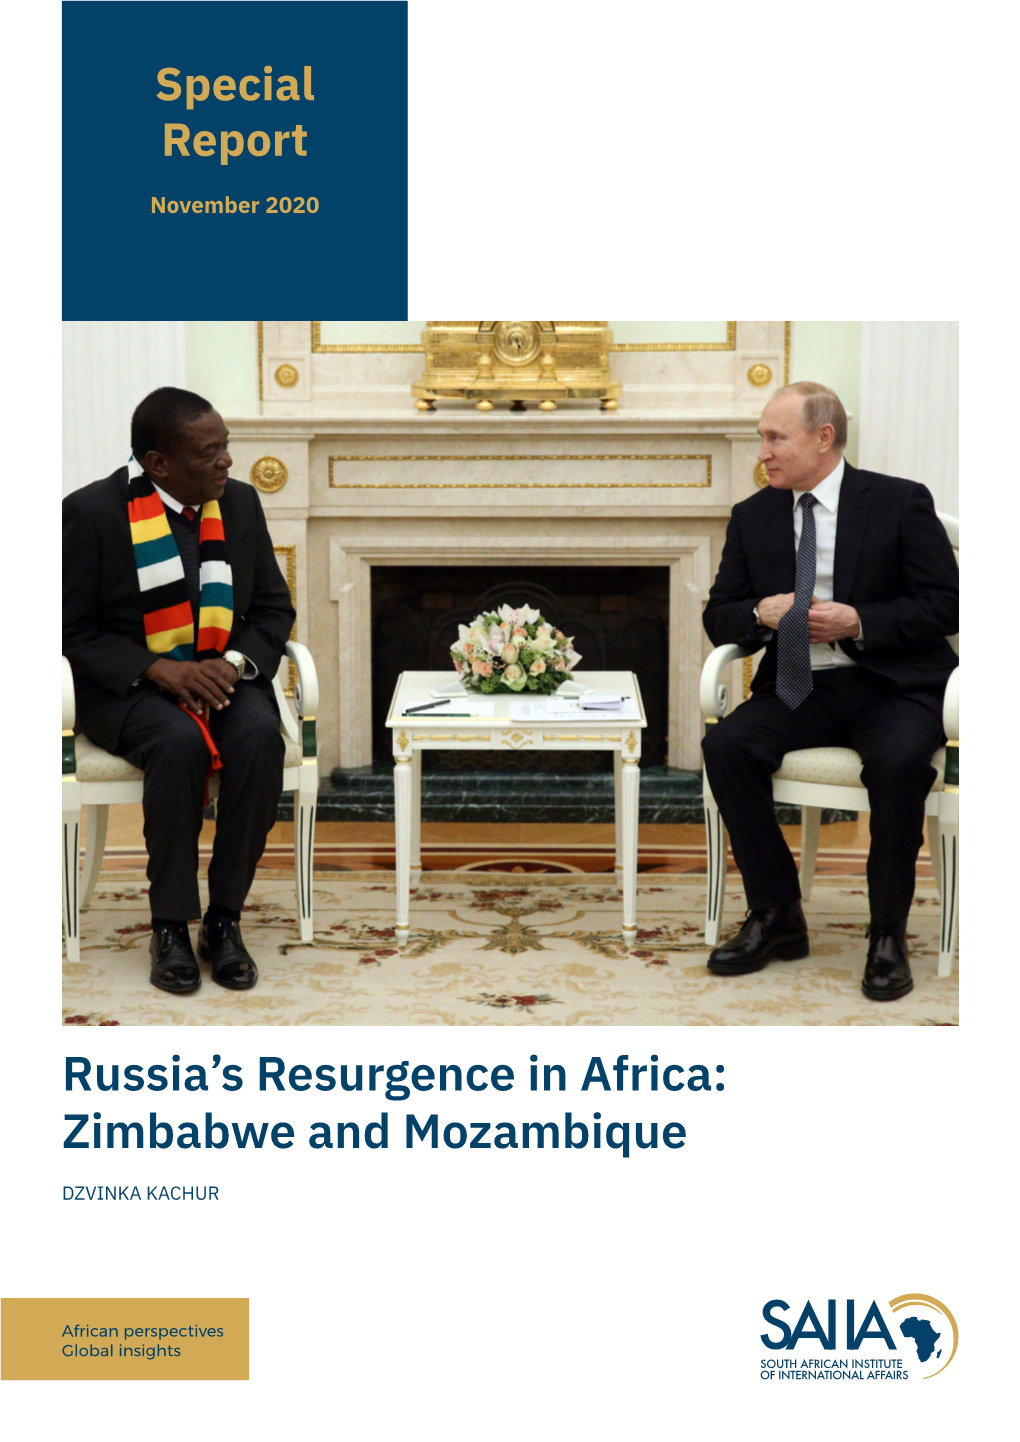 Russia's Resurgence in Africa: Zimbabwe and Mozambique